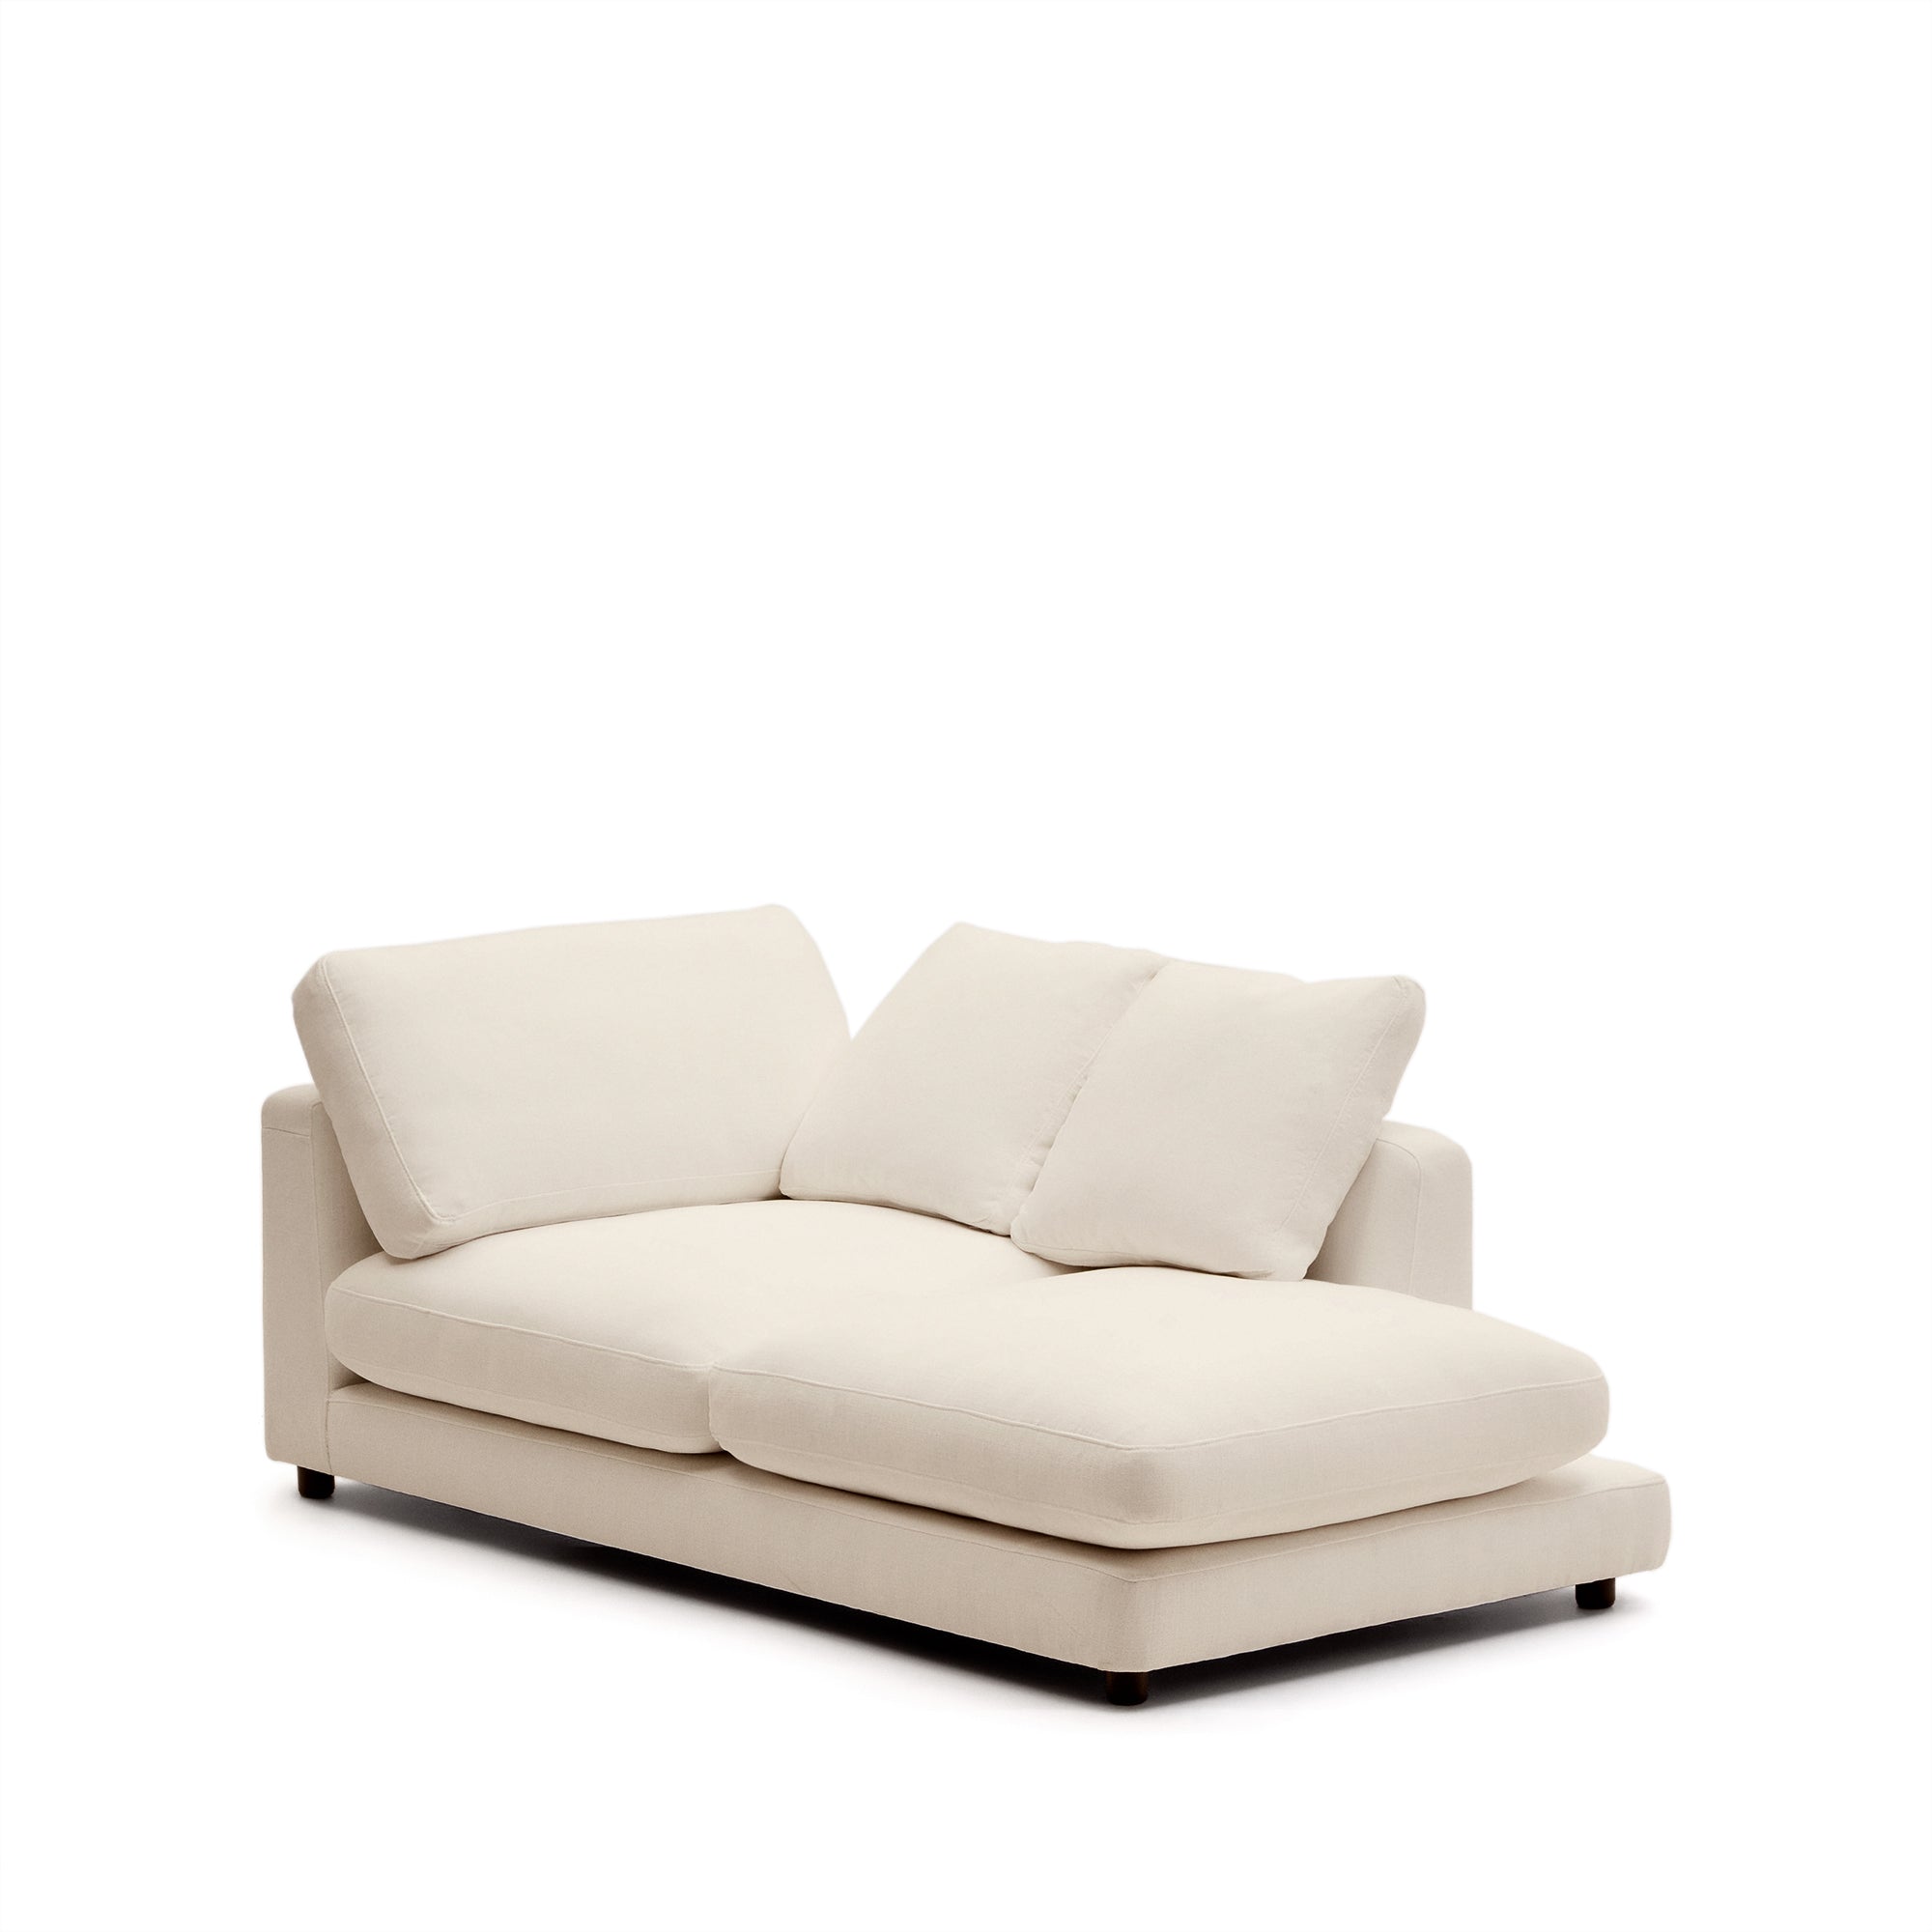 Gala right chaise longue in beige, 193 x 105 cm